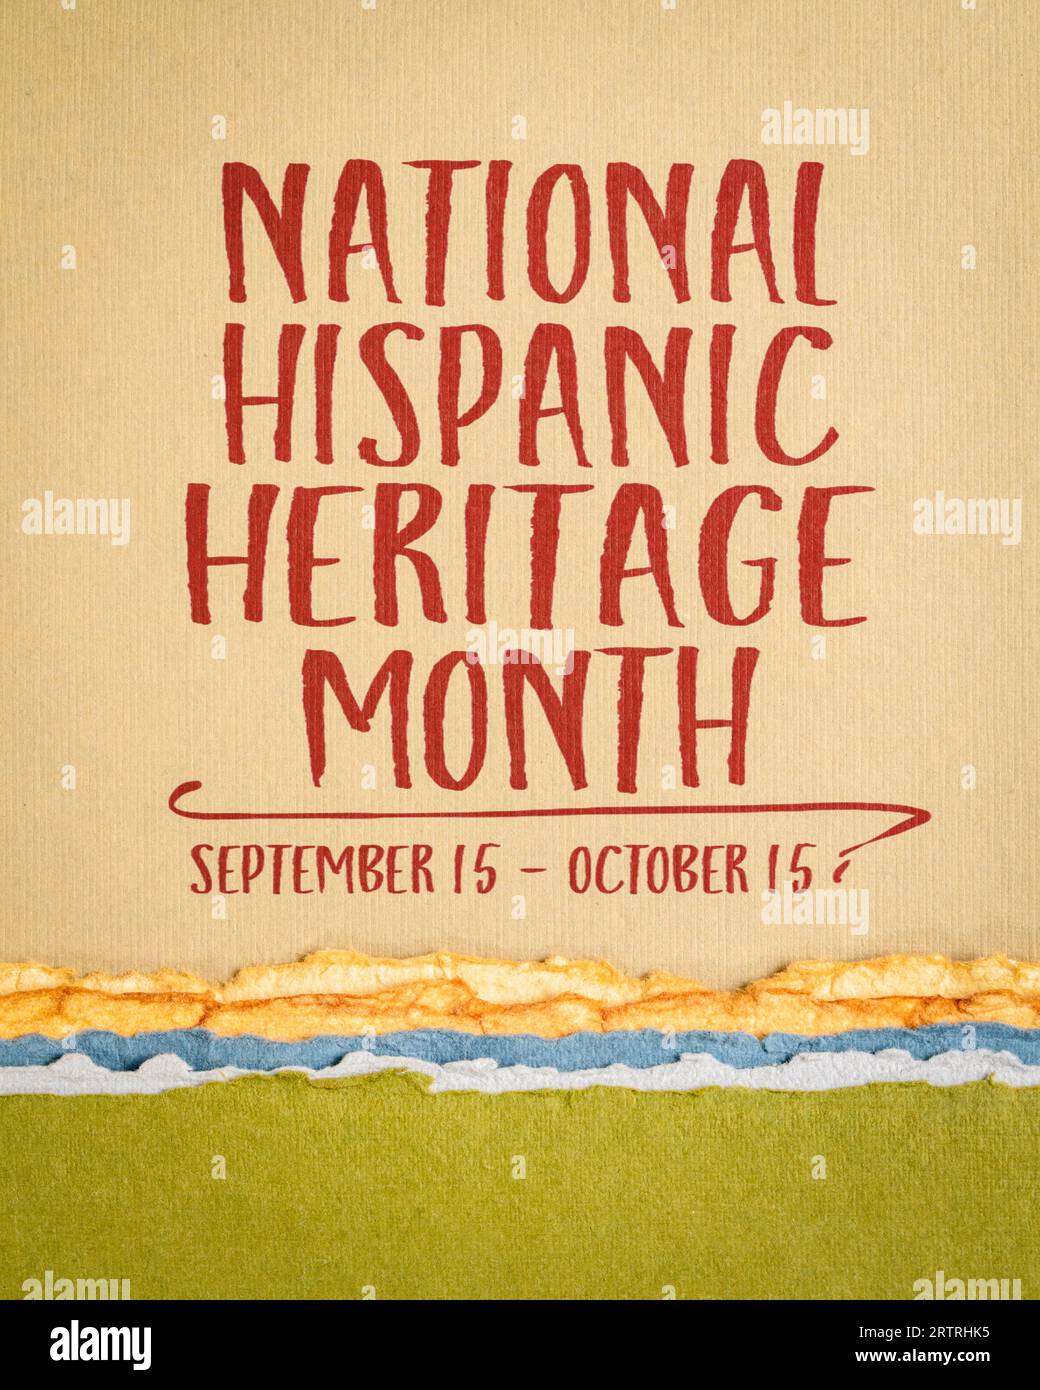 National Hispanic Heritage Month, September 15 - October 15 - text on art paper, reminder of cultural and historic event Stock Photo